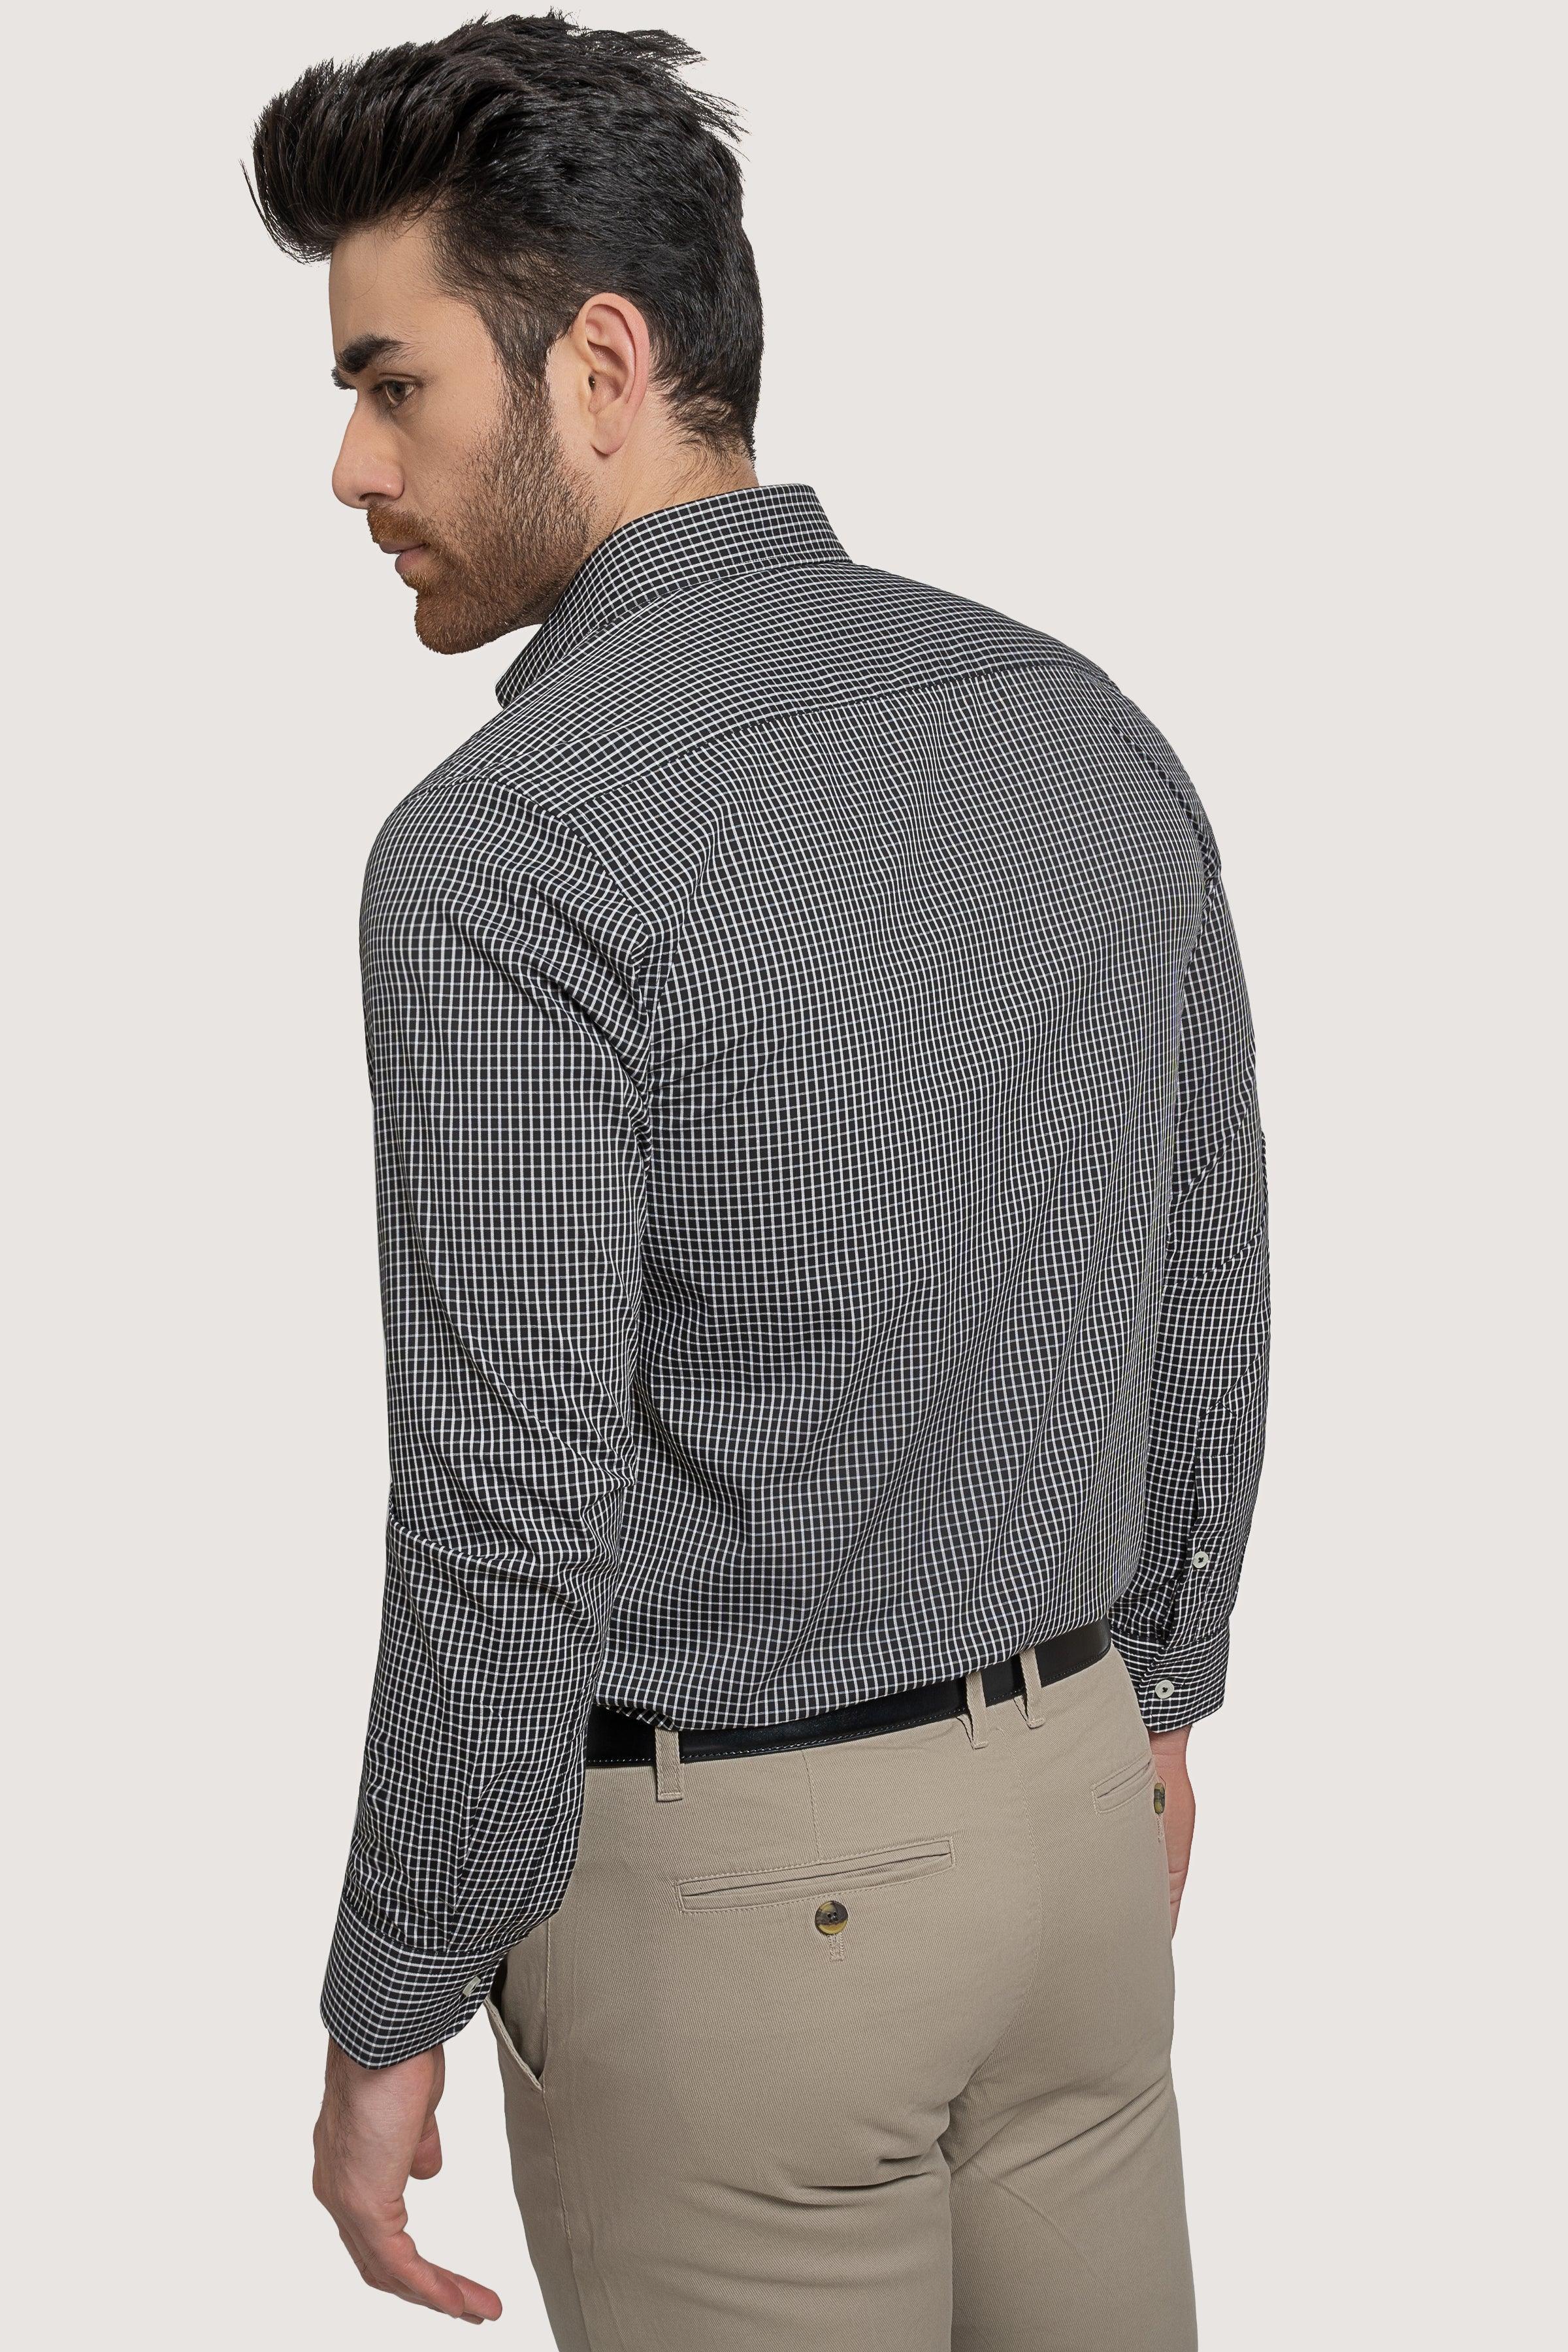 SEMI FORMAL BLUE WHITE CHECK at Charcoal Clothing